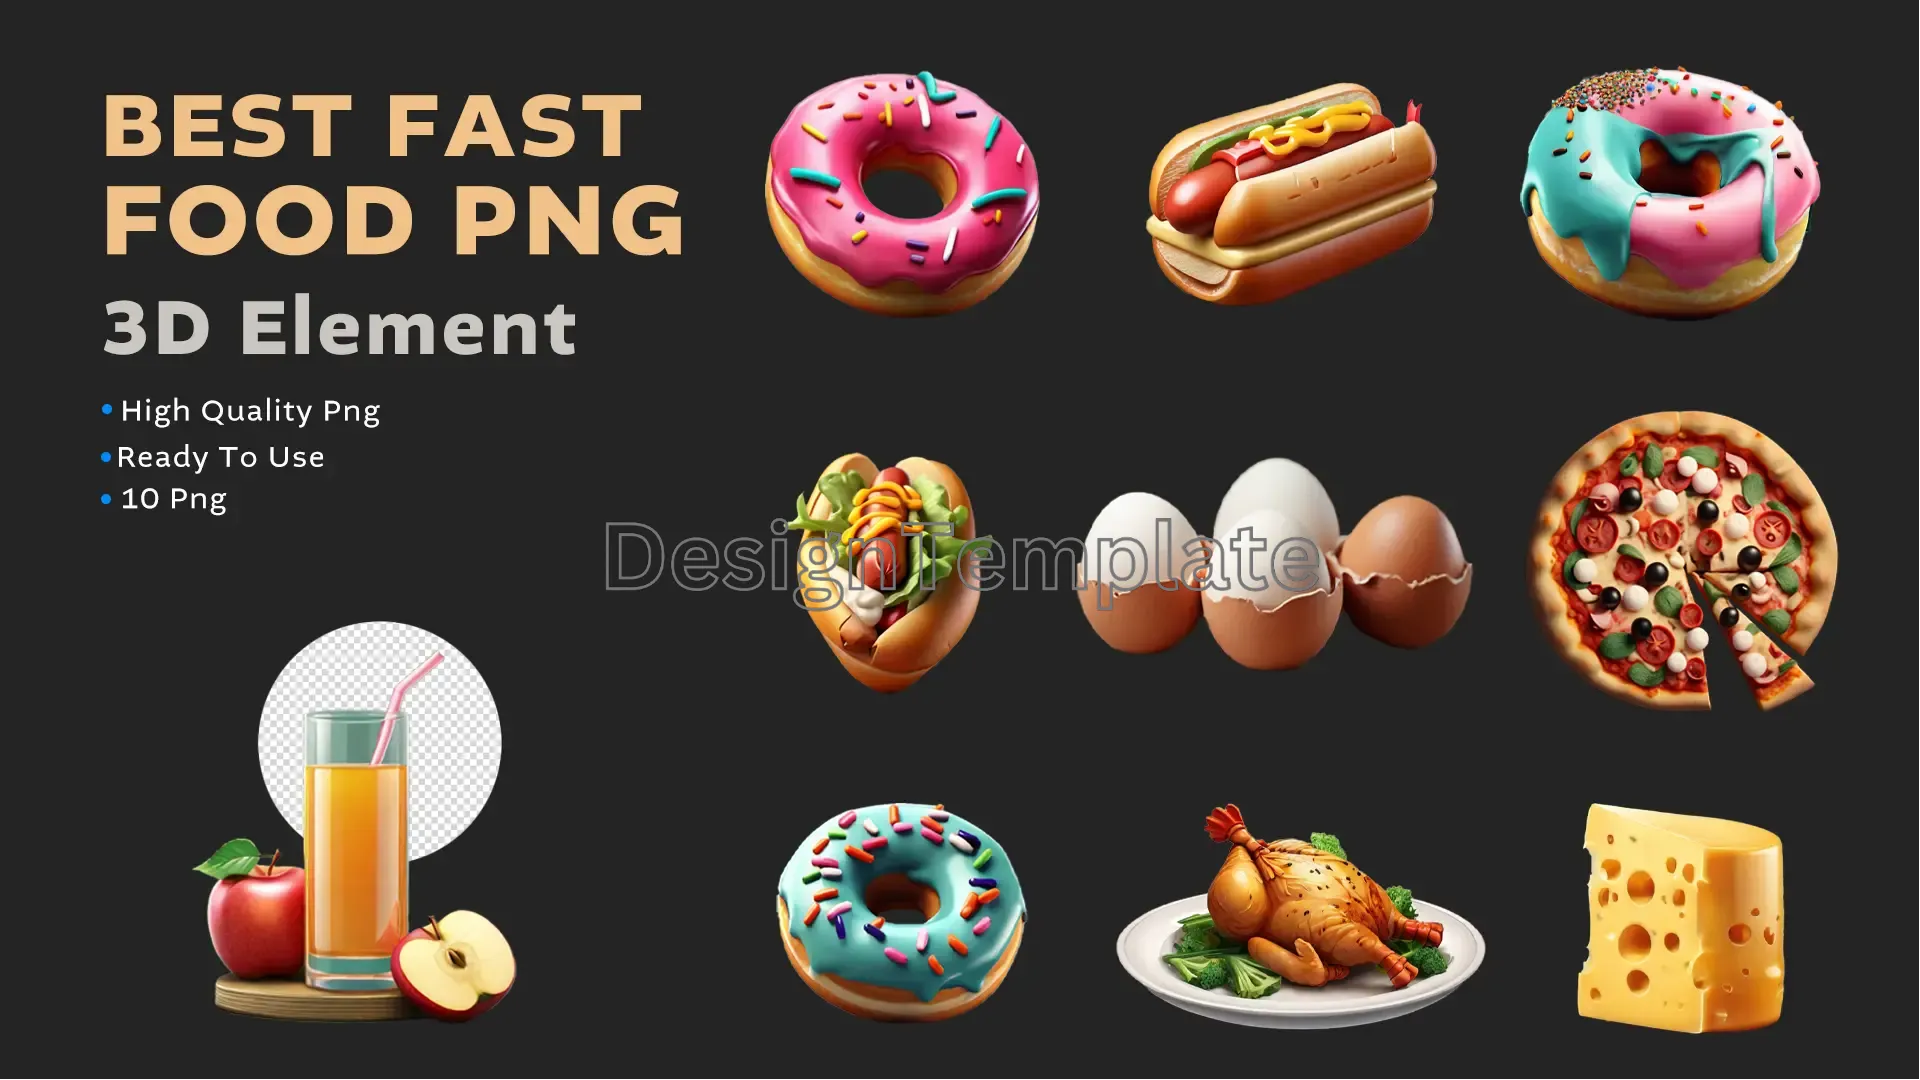 Flavor Frenzy Best Fast Food PNG 3D Elements Pack image